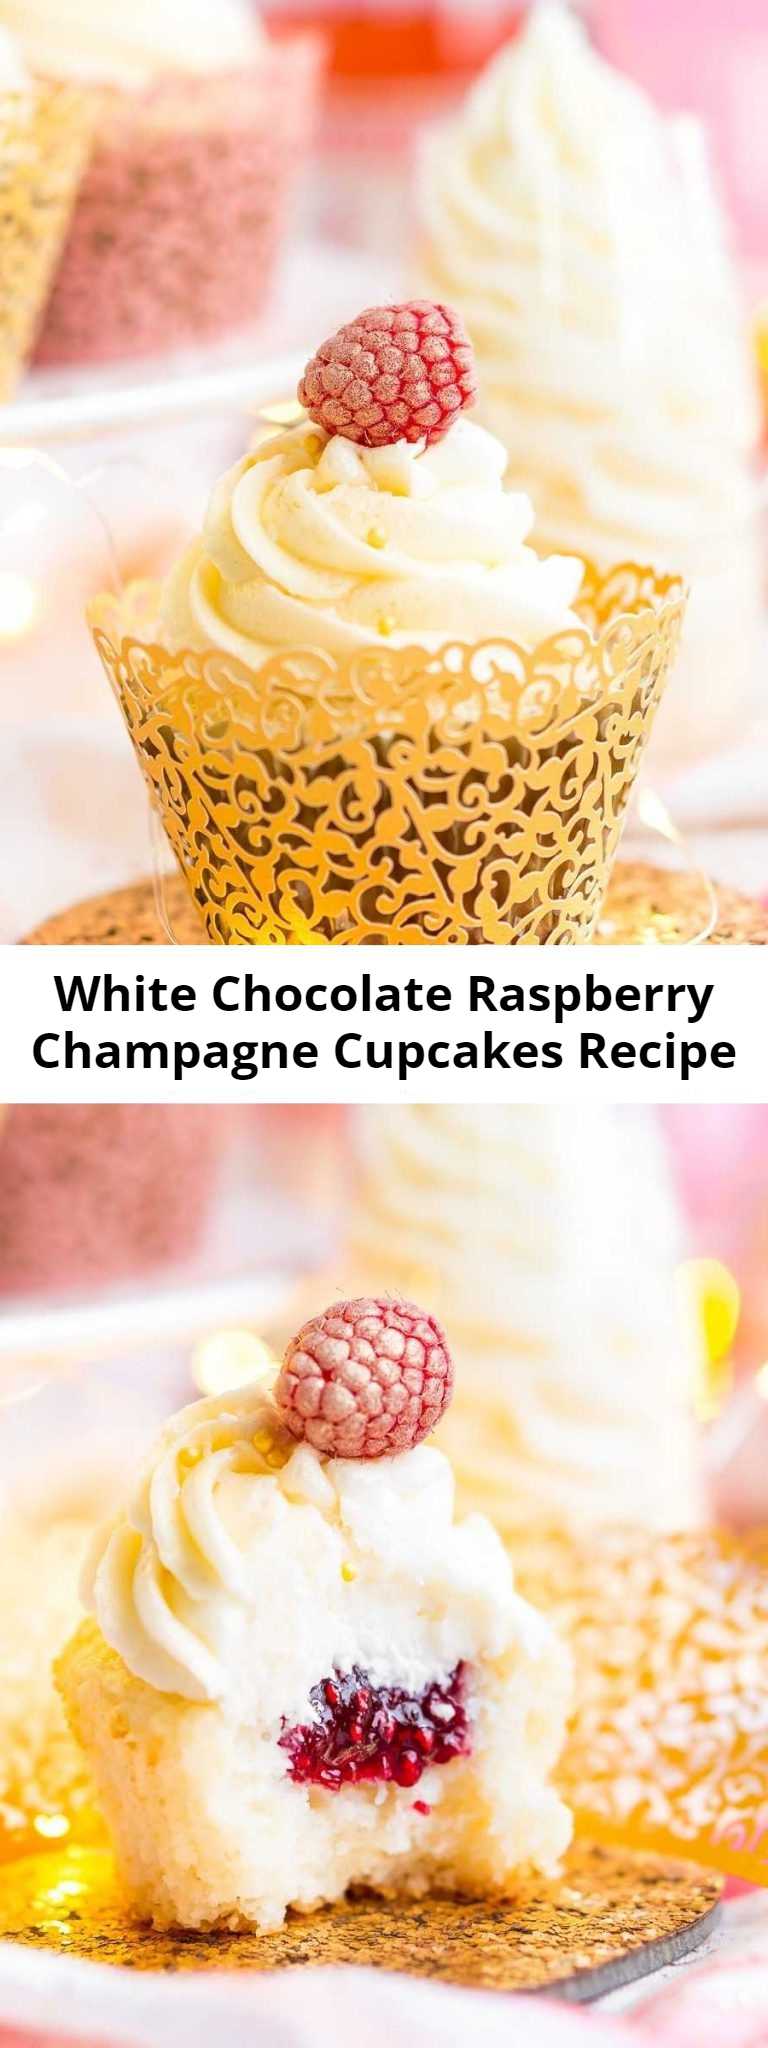 White Chocolate Raspberry Champagne Cupcakes Recipe - These White Chocolate Raspberry Champagne Cupcakes are perfect for New Year’s Eve, Bridal and Baby Showers, and Valentine’s Day! Light and fluffy white chocolate cake filled with raspberry filling and topped with a luscious champagne buttercream!